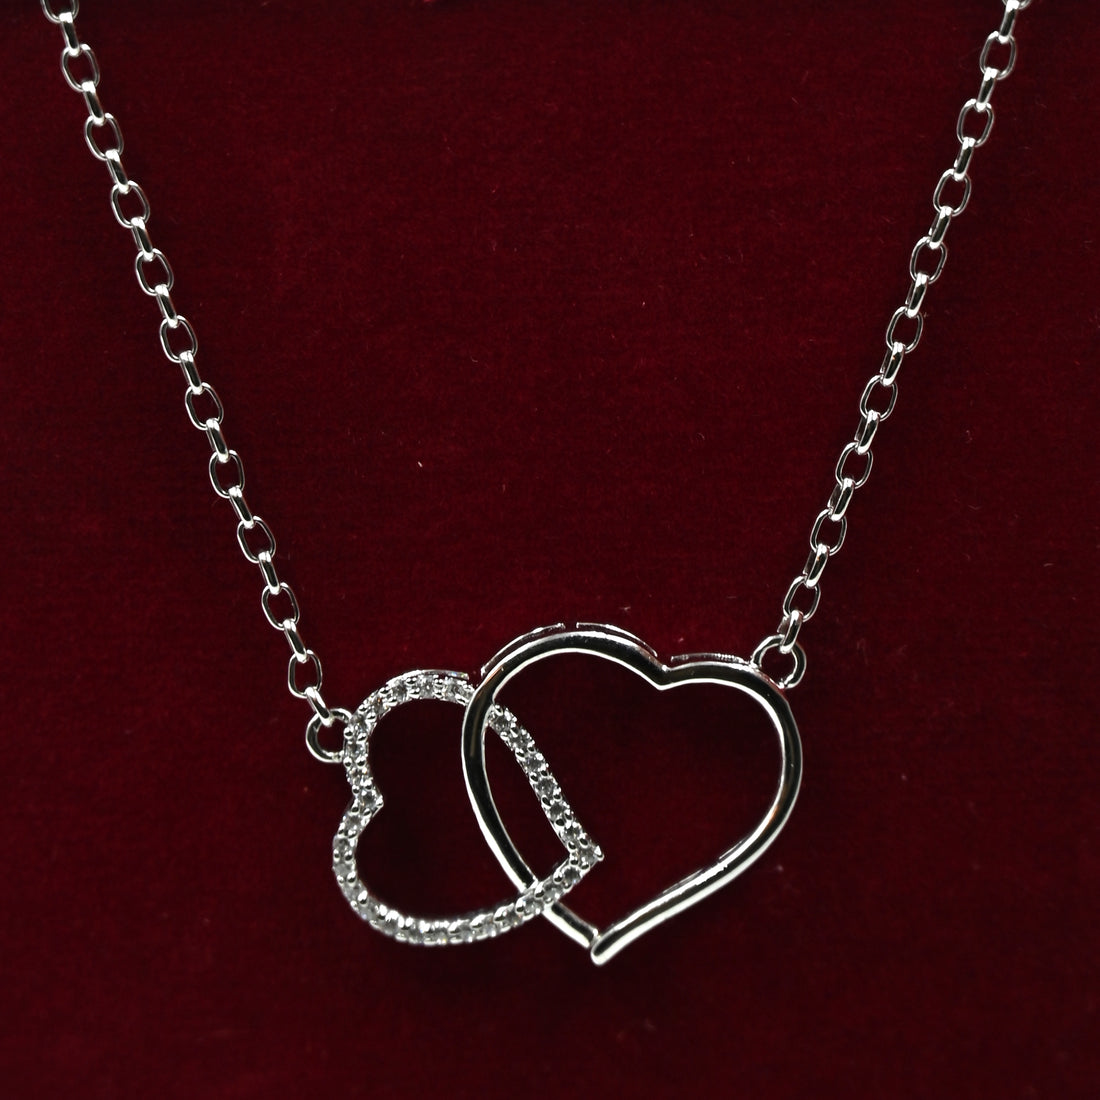 Hearts in Love Pendant Silver Zircon Pendant with Link Chain